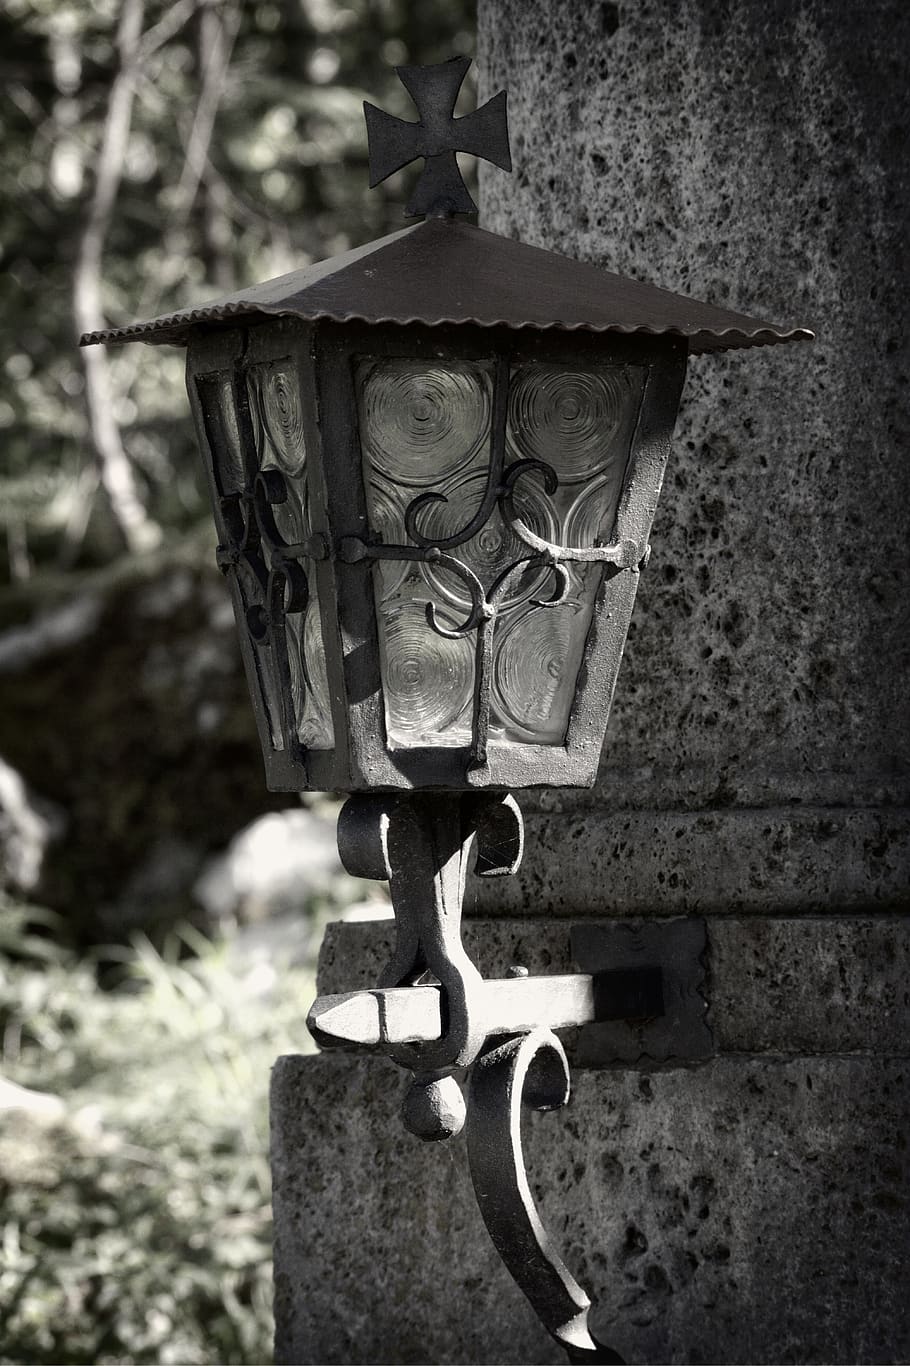 lamp, lighting, light, lantern, candlestick, outdoor, old, out of date, wrought iron, nostalgia